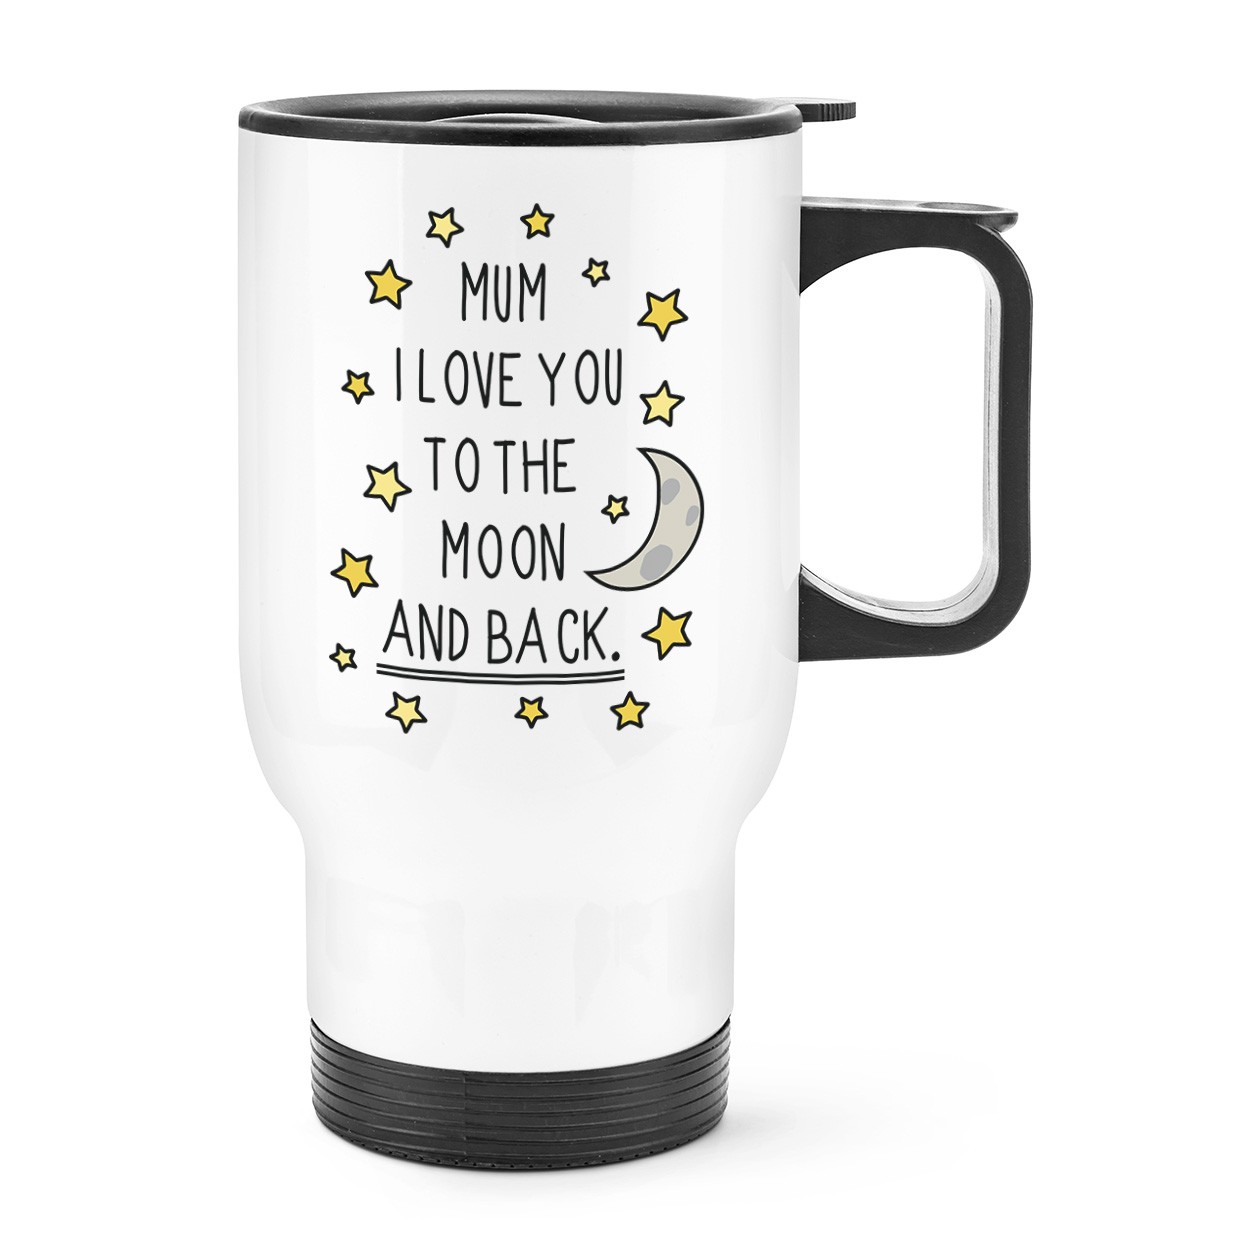 Mum I Love You To The Moon And Back Travel Mug Cup With Handle